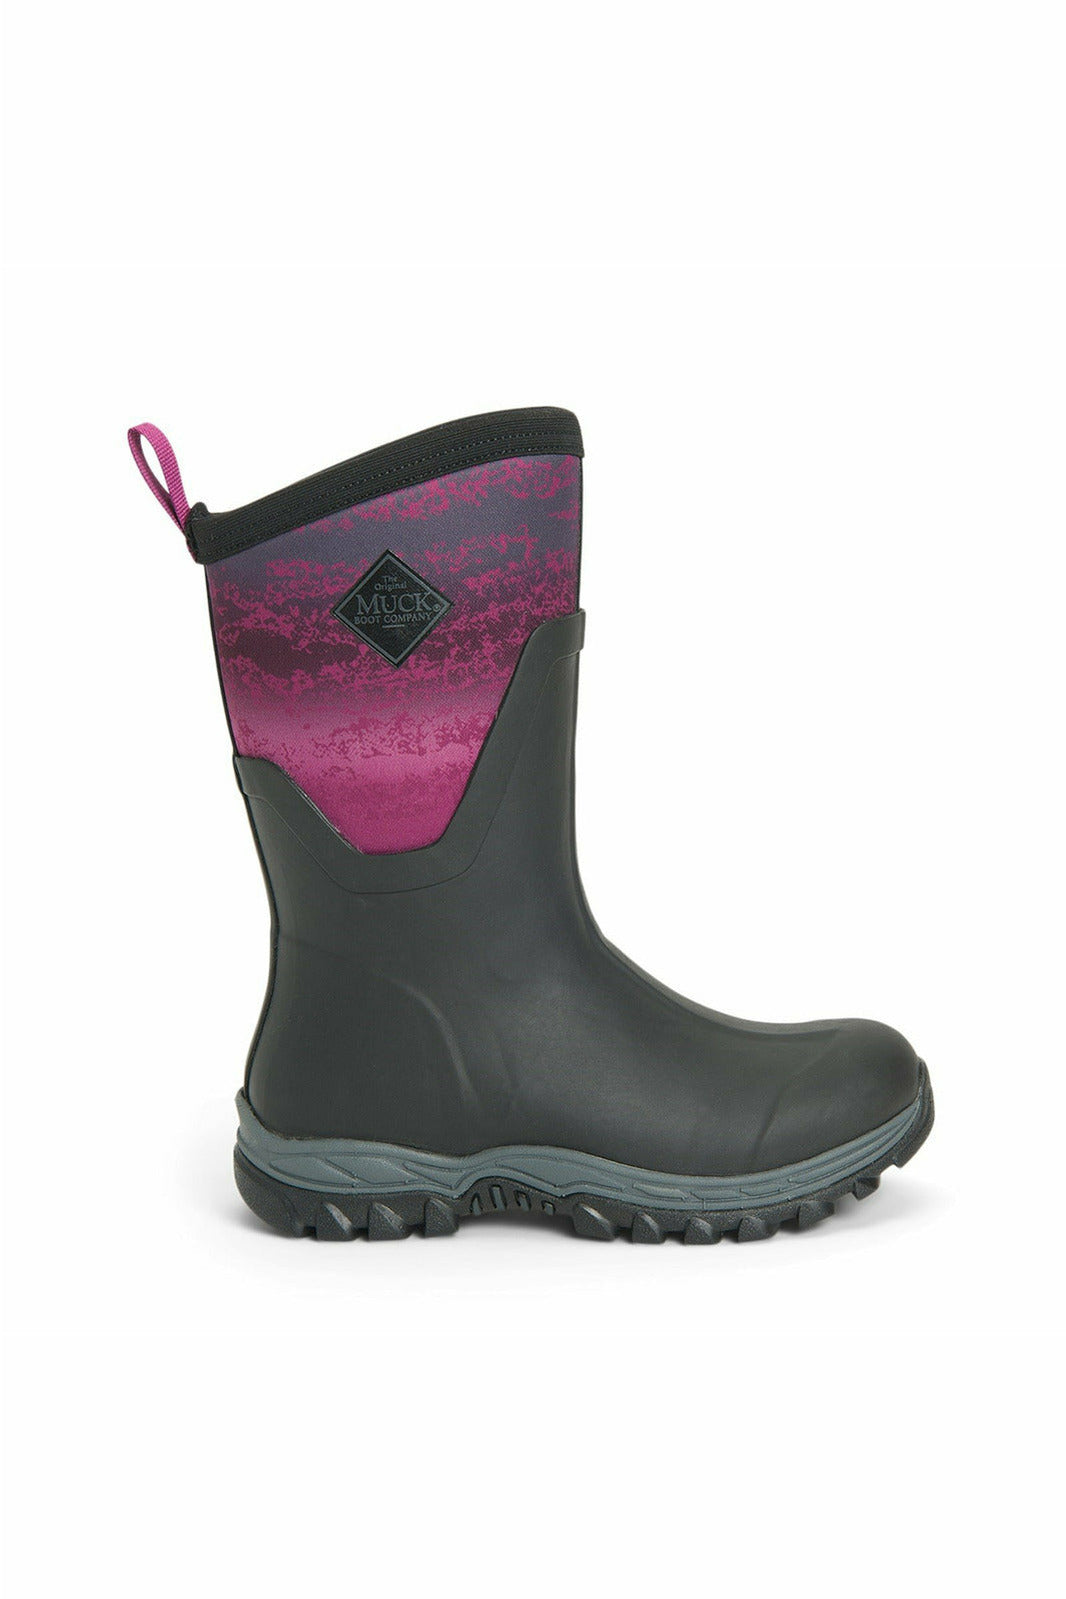 Muck Boots - Arctic Sport Mid Pull On Wellington Boot